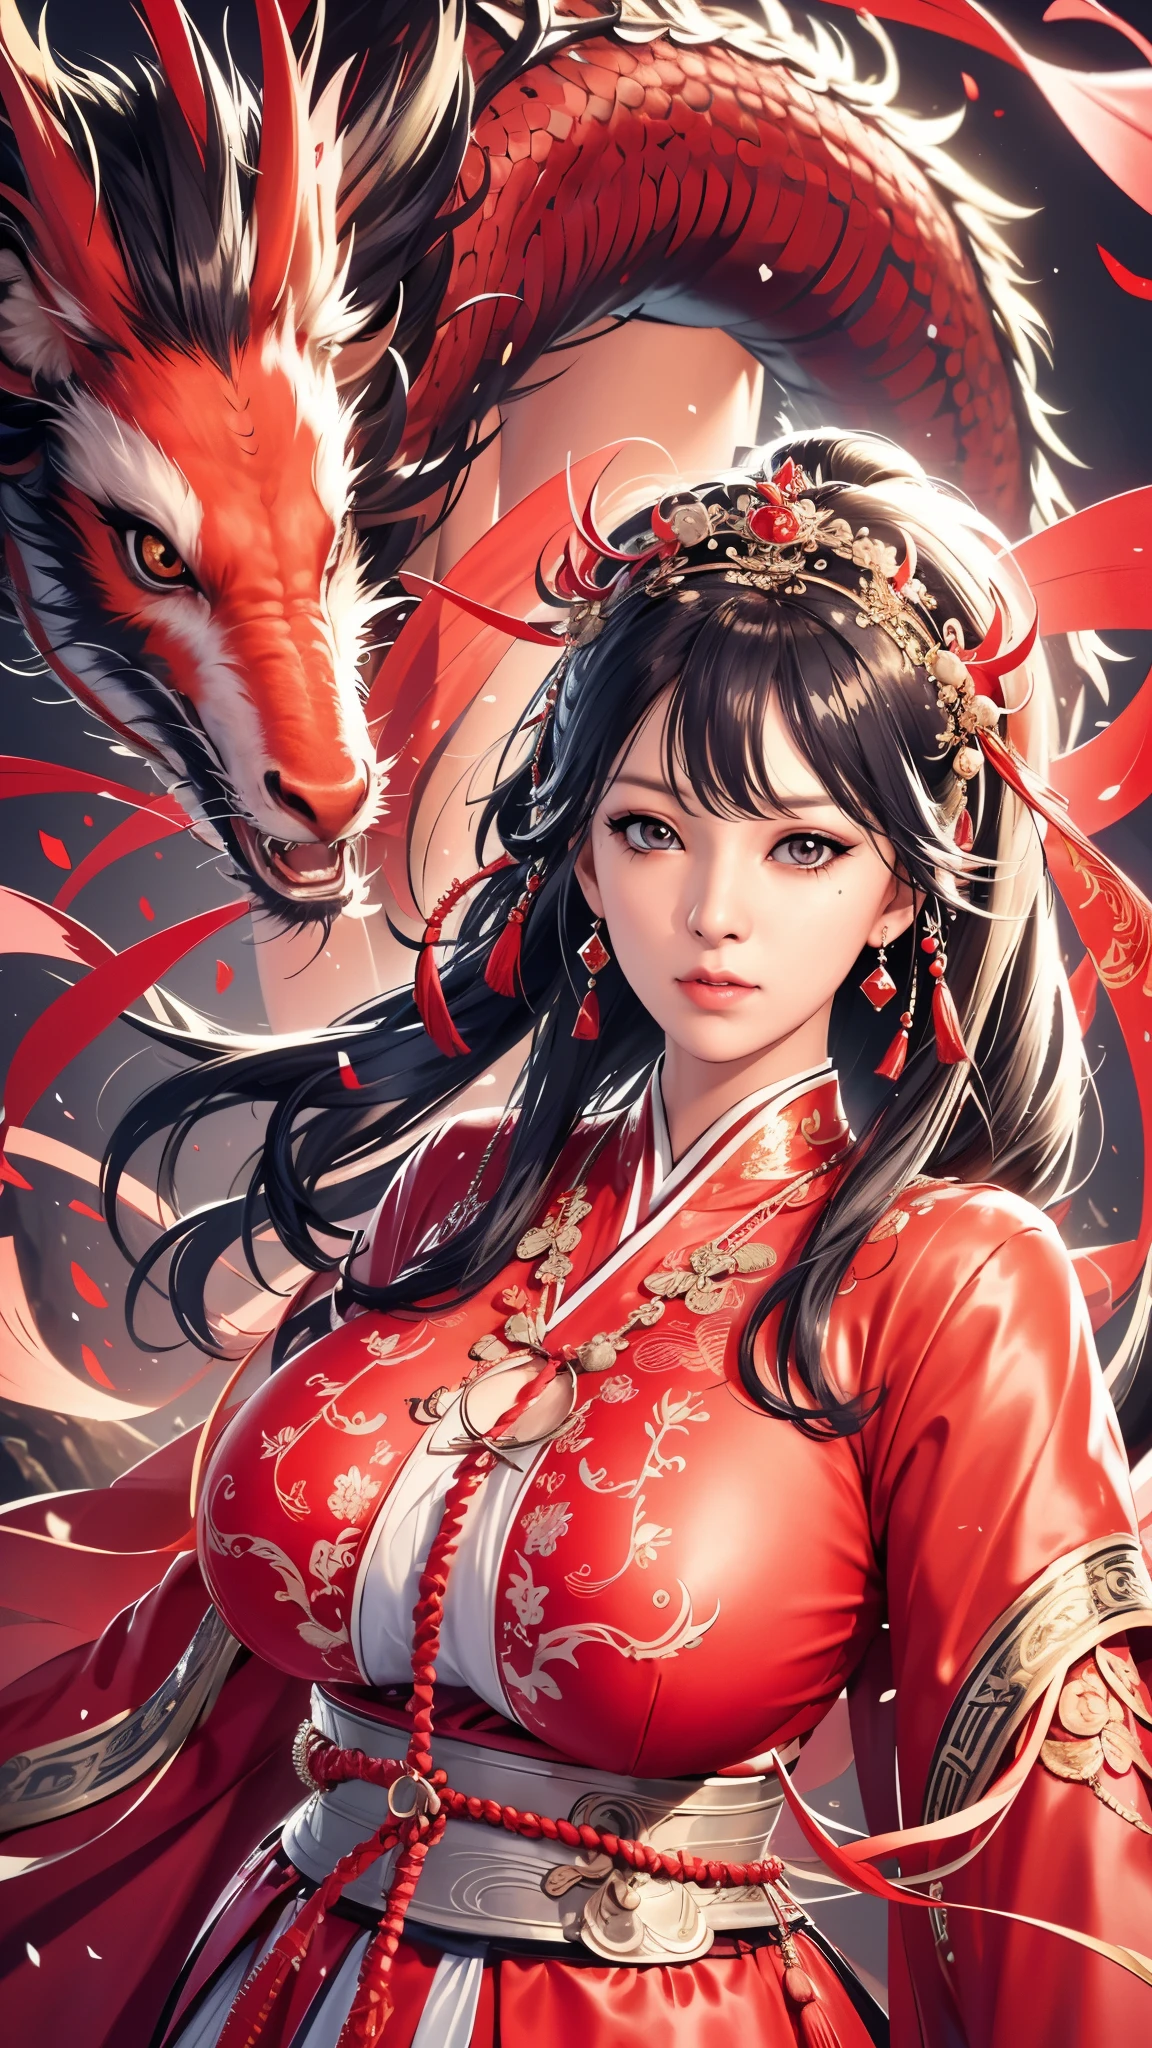 （（（Perfect figure，figure，red Hanfu，Winter hanfu，Chinese clothes,red clothes，red background,dragon，(Chinese fabric:1.2), Hanfu， dragon and girl，dragon hood，xuer lion head,dragon，long hair，black hair，hair accessories，Chinese clothing，lantern，Oriental dragon,（（（ailisha，Brown pupils，1girl，独奏，long black hair，Exposing bangs ））），（（（wide hips））），S-shaped figure:1.7））），((masterpiece)),high resolution, ((Best quality at best))，masterpiece，quality，Best quality，（（（ Exquisite facial features，looking at the audience,There is light in the eyes，blush，shy，Happy，laughing out loud））），（（（Light and shadow interlace，huge ））），（（（looking into camera，Sitting on a dragon）））